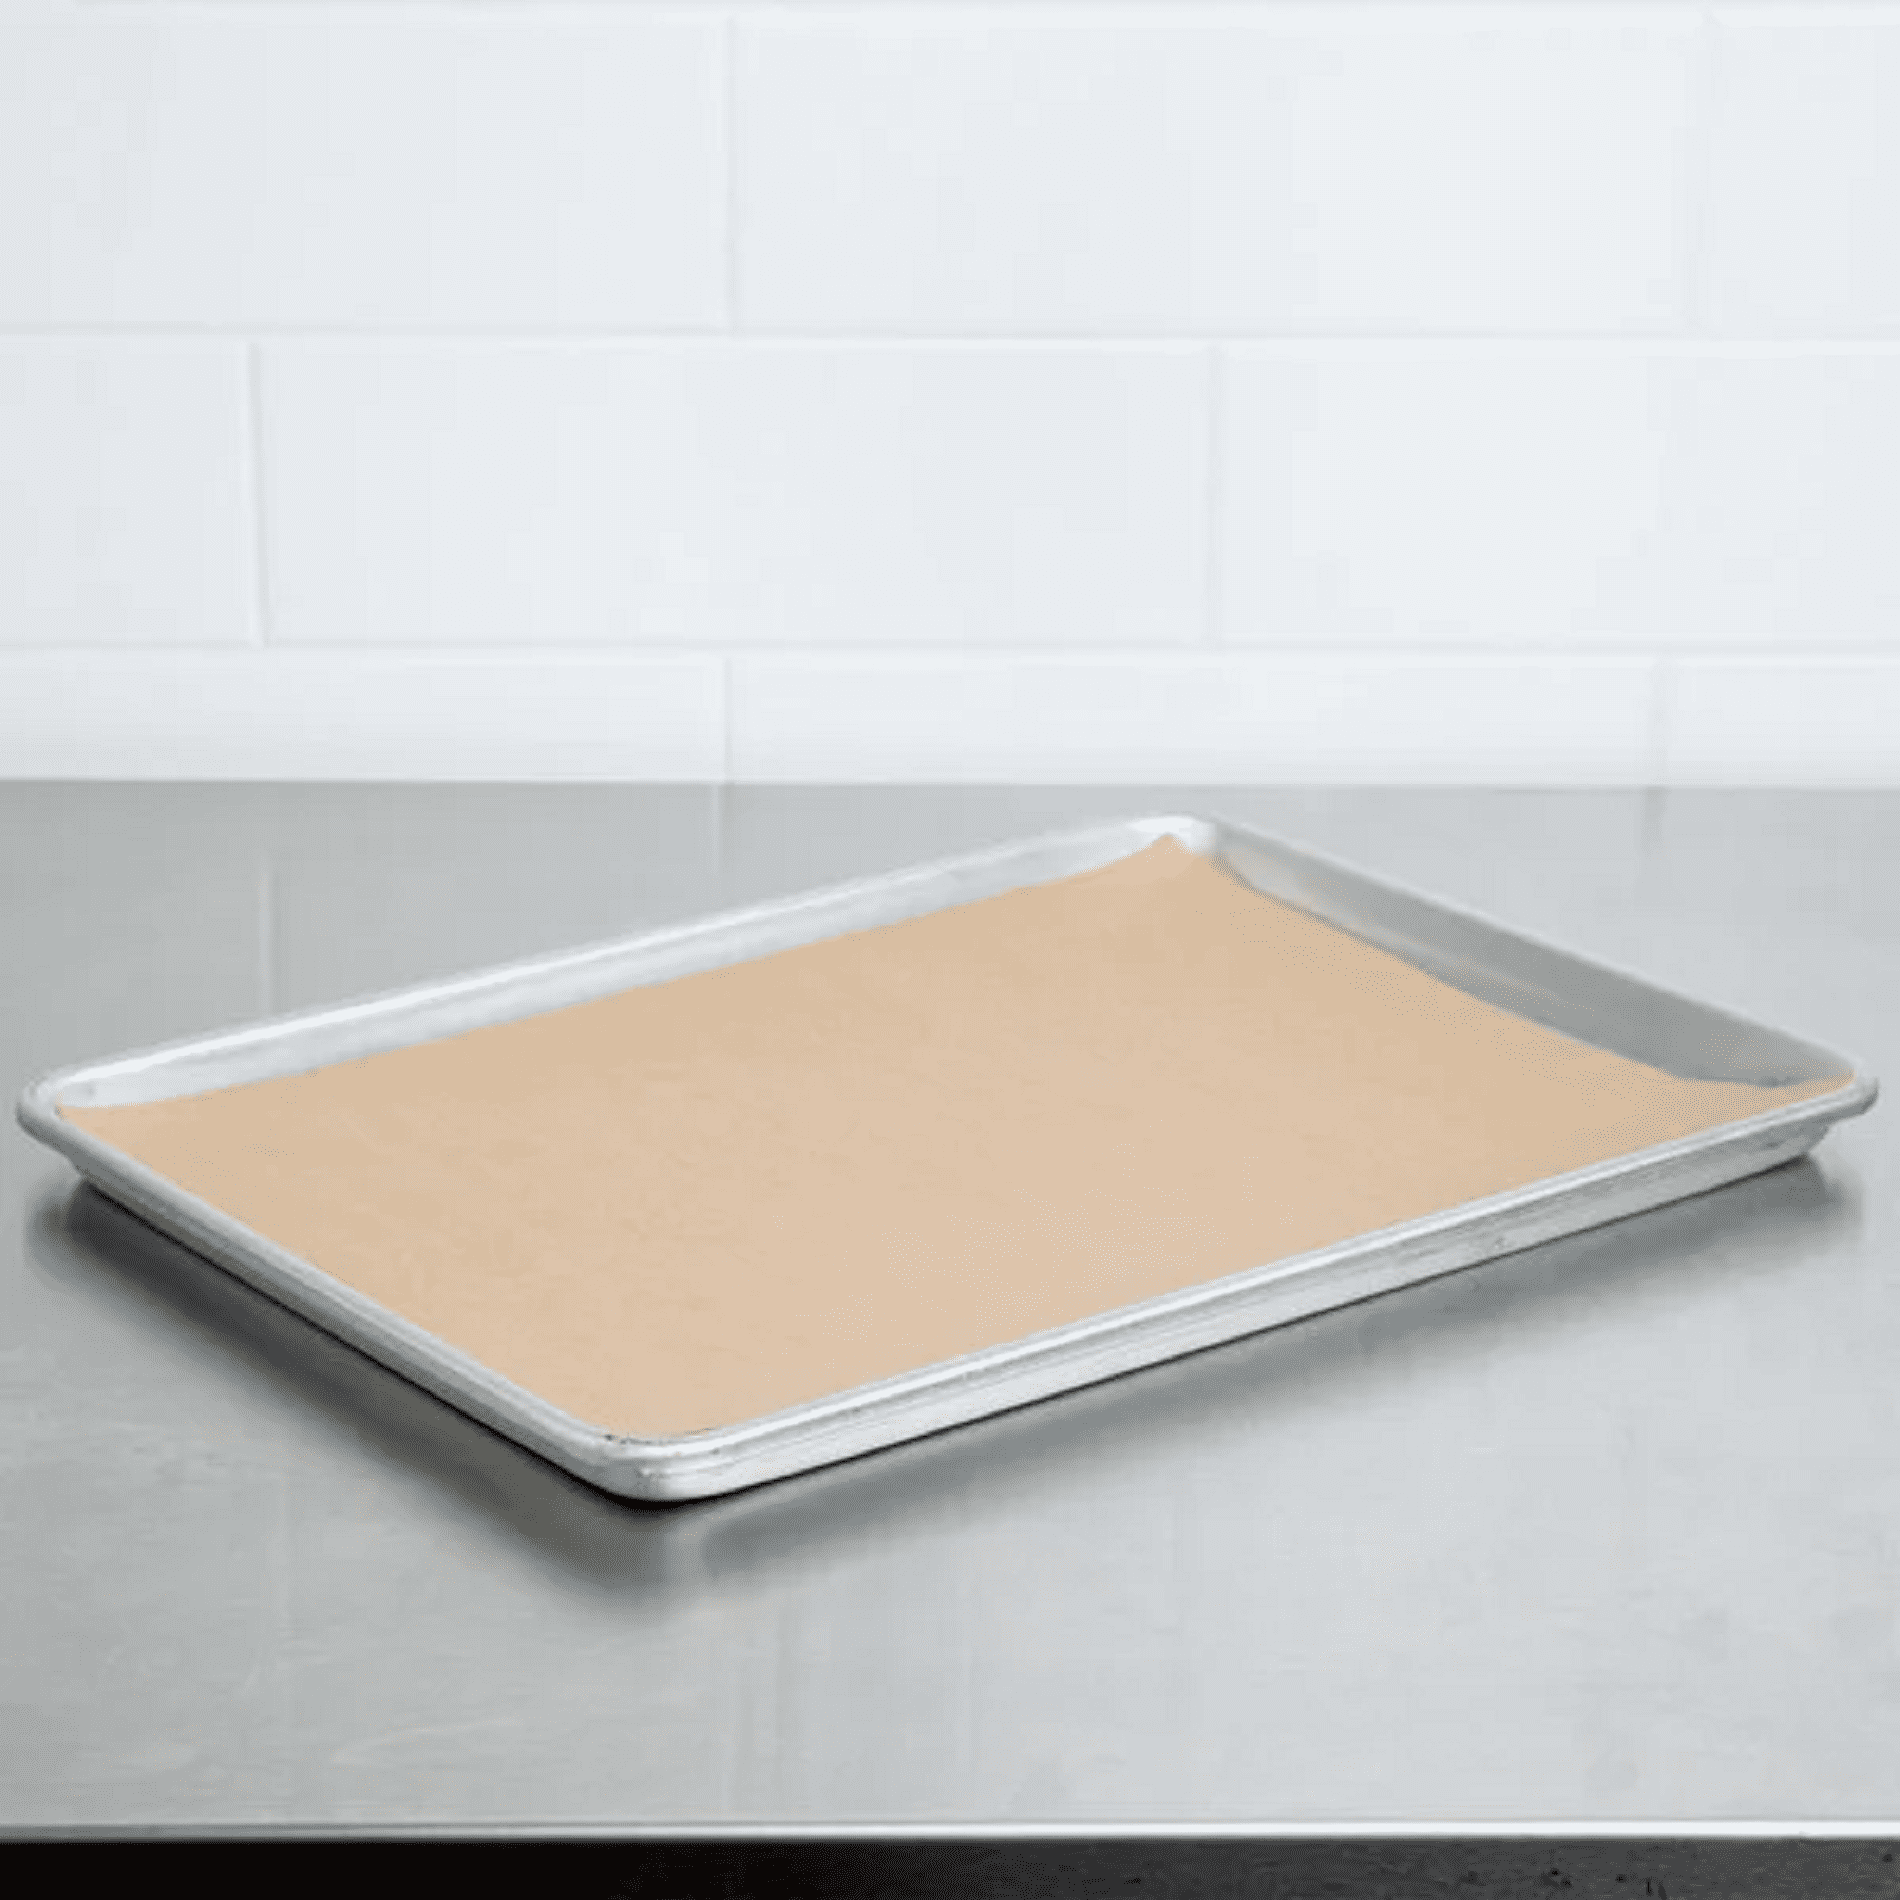 Pastry Tek Unbleached Paper Full Size Sheet Pan Liner - Silicone Coated - 16 inch x 24 inch - 1000 Count Box, Beige